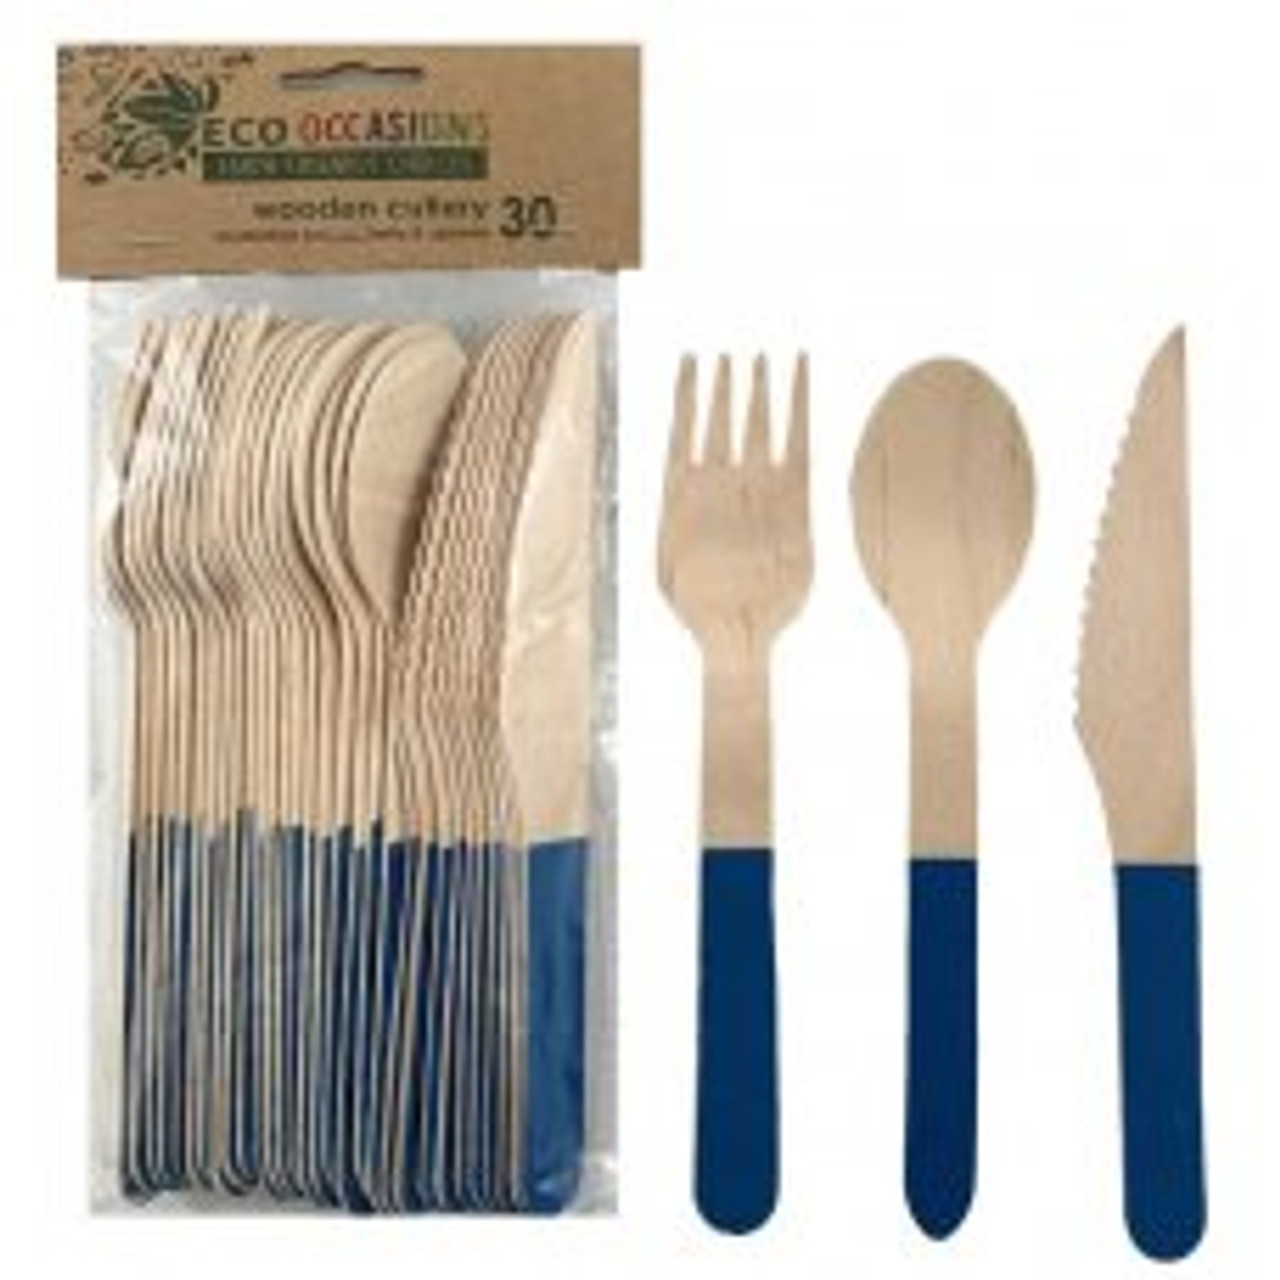 ECO WOODEN CUTLERY SETS ROYAL BLUE (6 EACH FORK KNIFE SPOON )